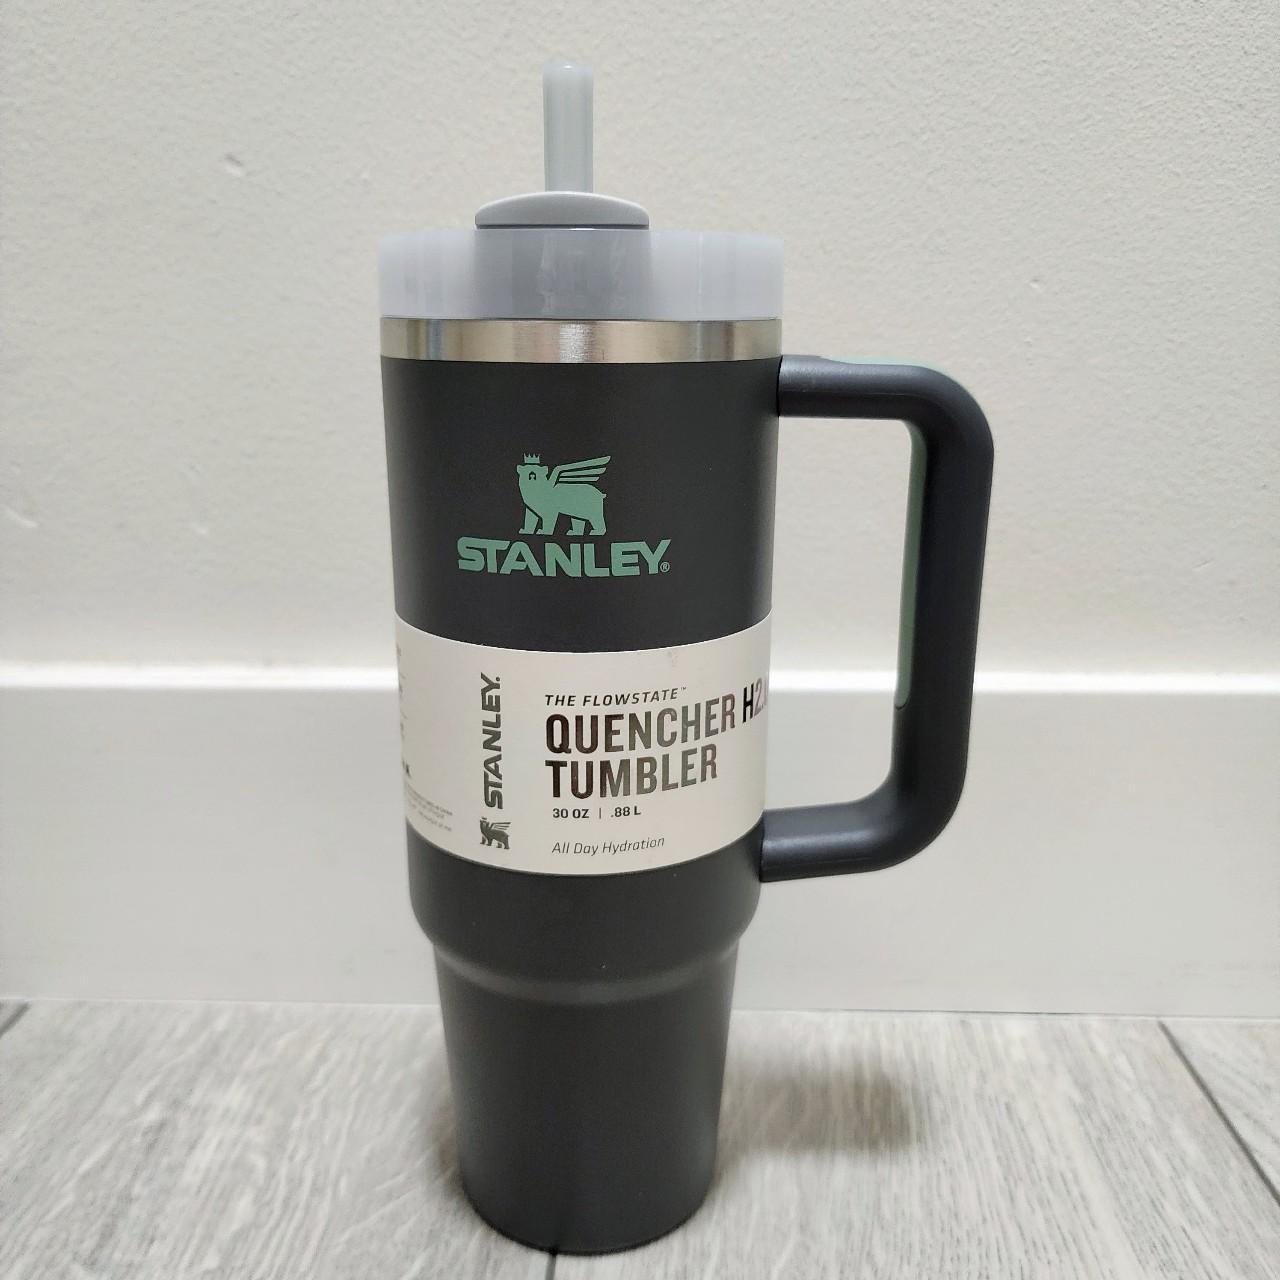 Stanley Quencher H2.0 Tumbler Straw Cup Flow State - Depop